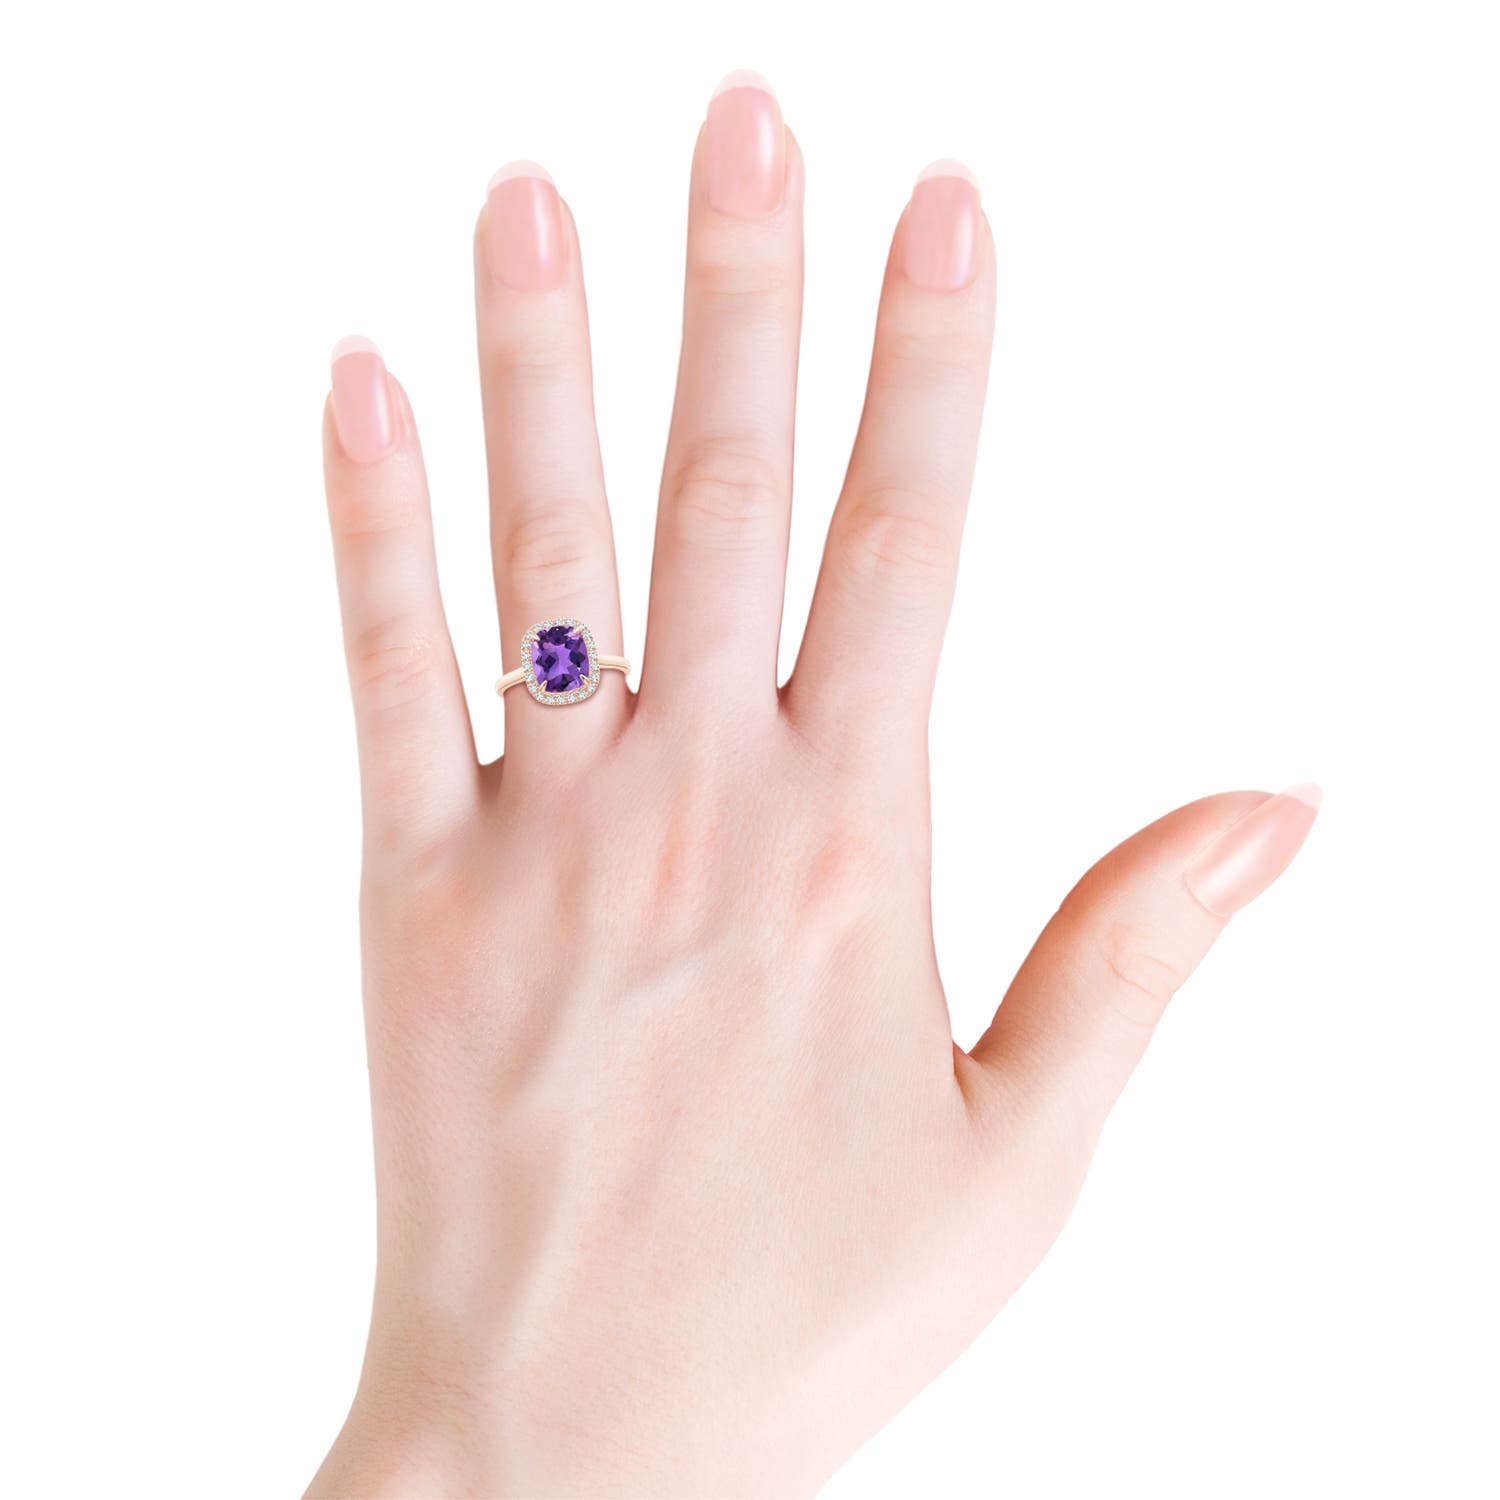 AAA - Amethyst / 2.22 CT / 14 KT Rose Gold